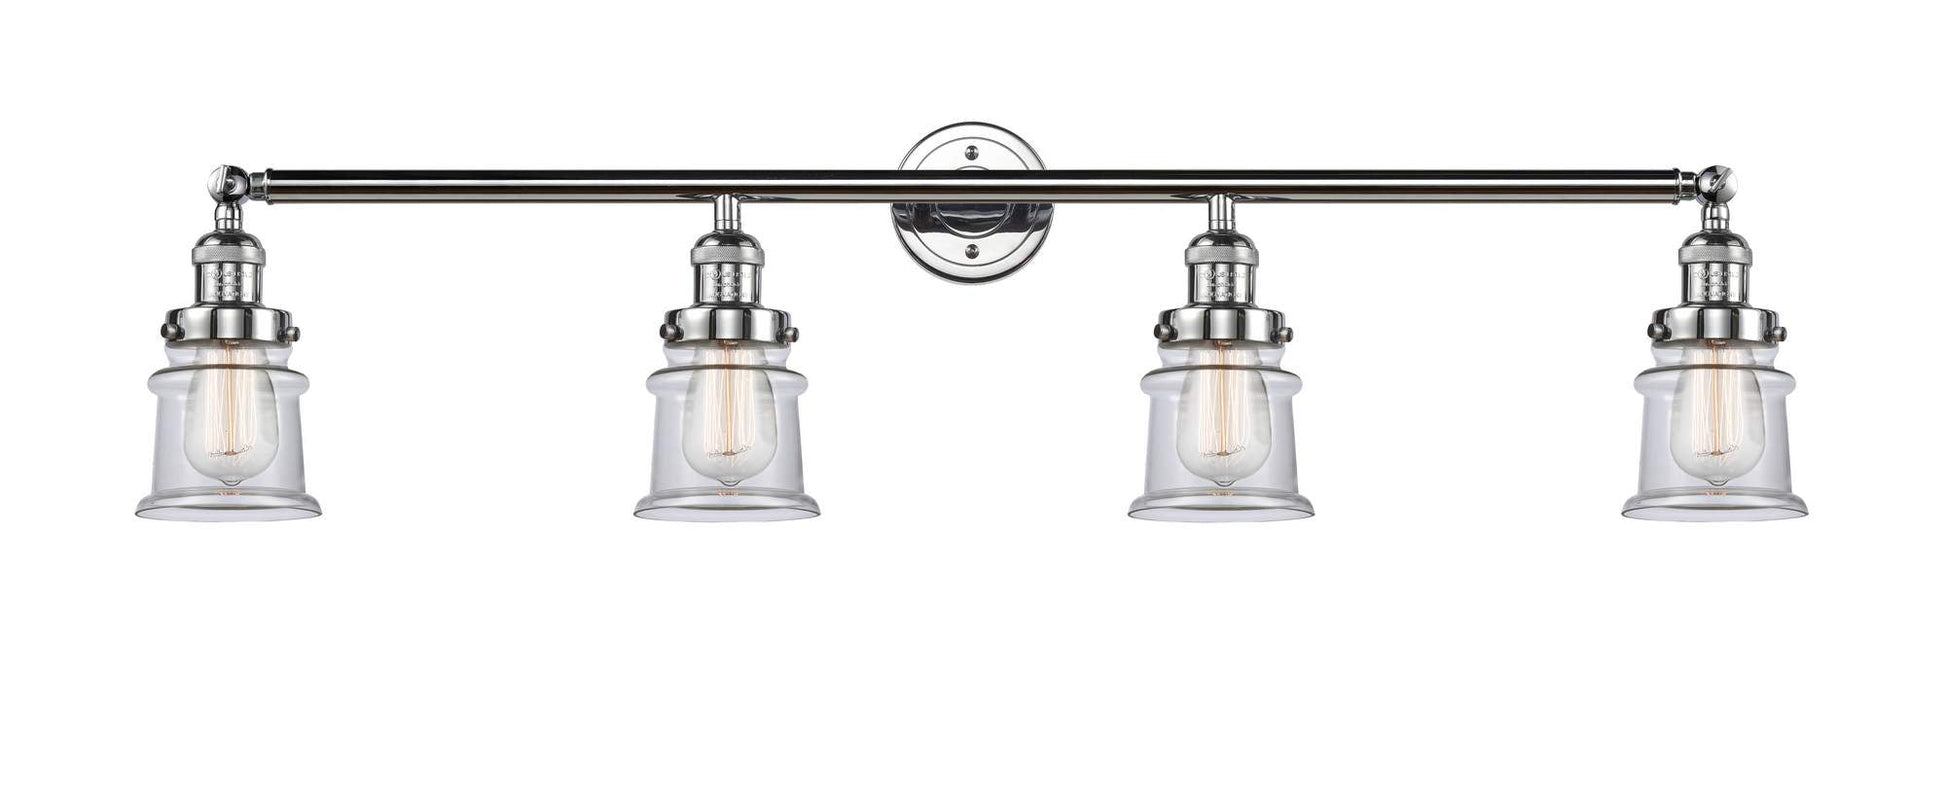 215-PC-G182S 4-Light 42" Polished Chrome Bath Vanity Light - Clear Small Canton Glass - LED Bulb - Dimmensions: 42 x 7.5 x 11.25 - Glass Up or Down: Yes